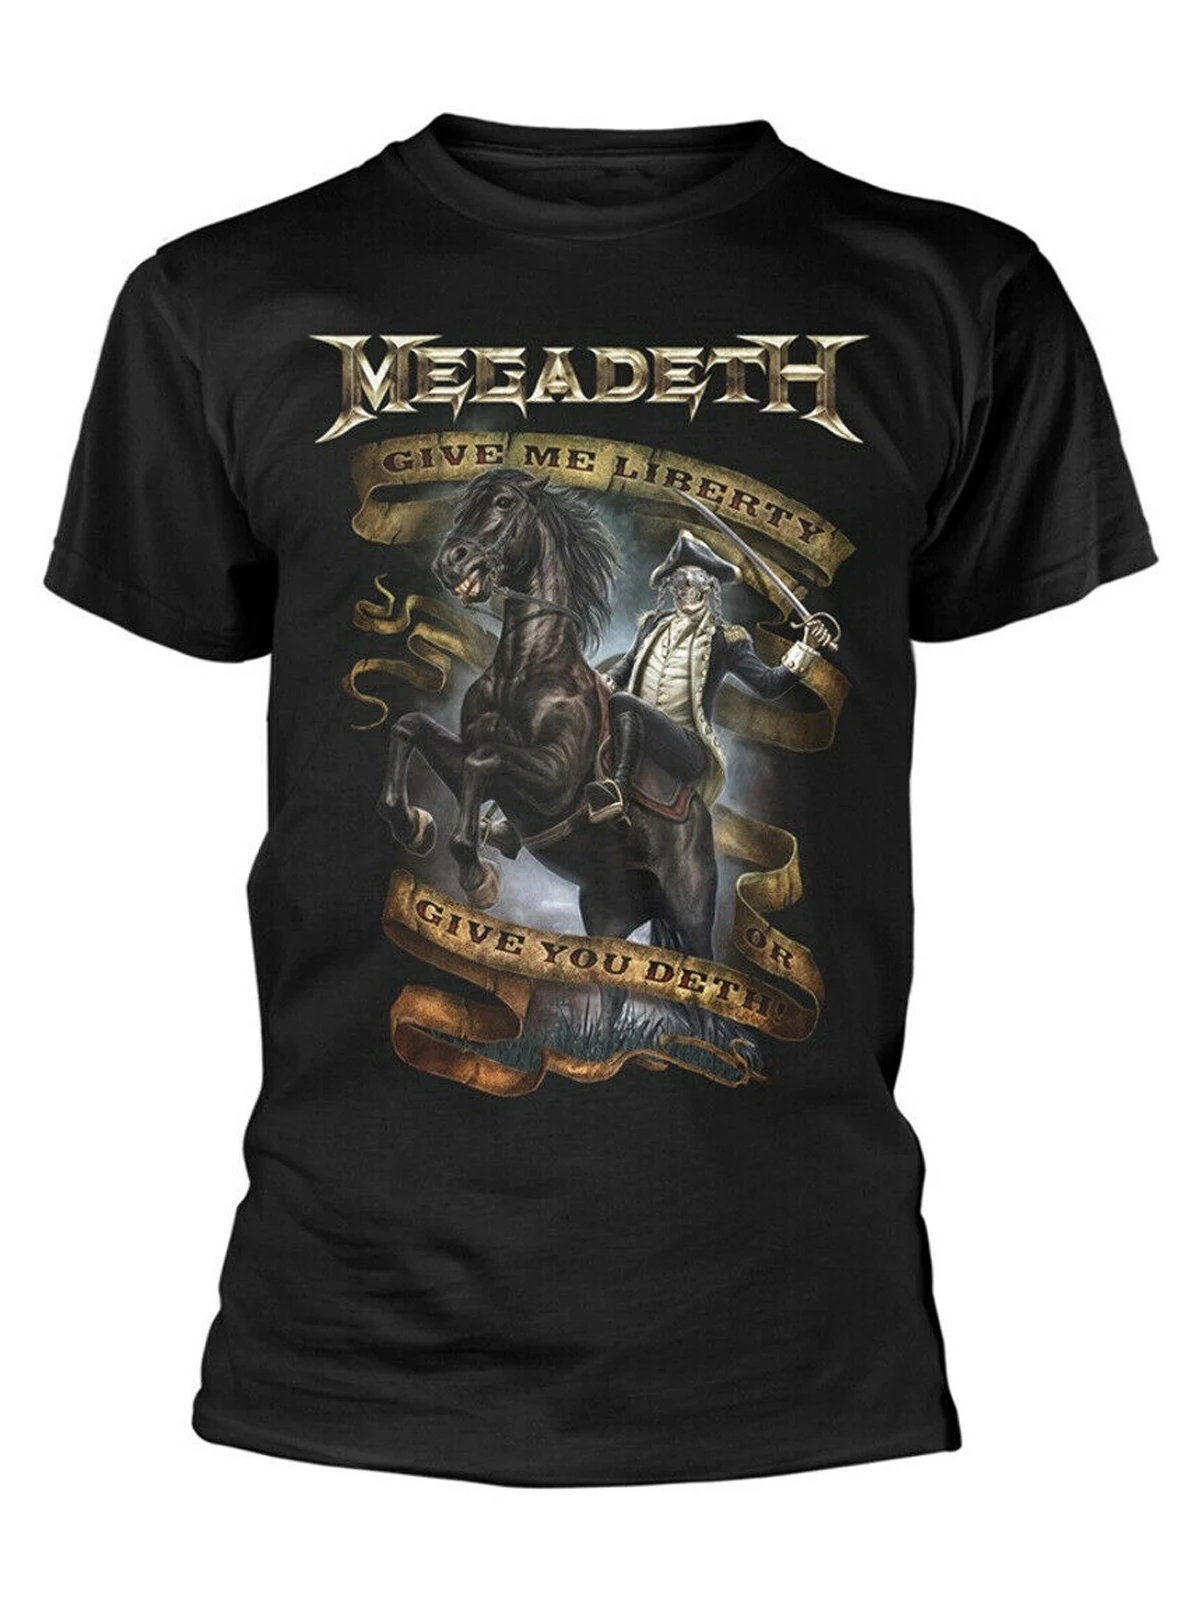 

Give Me Liberty or Give You Deth. Thrash Metal Band Music Album Free Knight T Shirt New 100% Cotton Short Sleeve O-Neck T-shirt